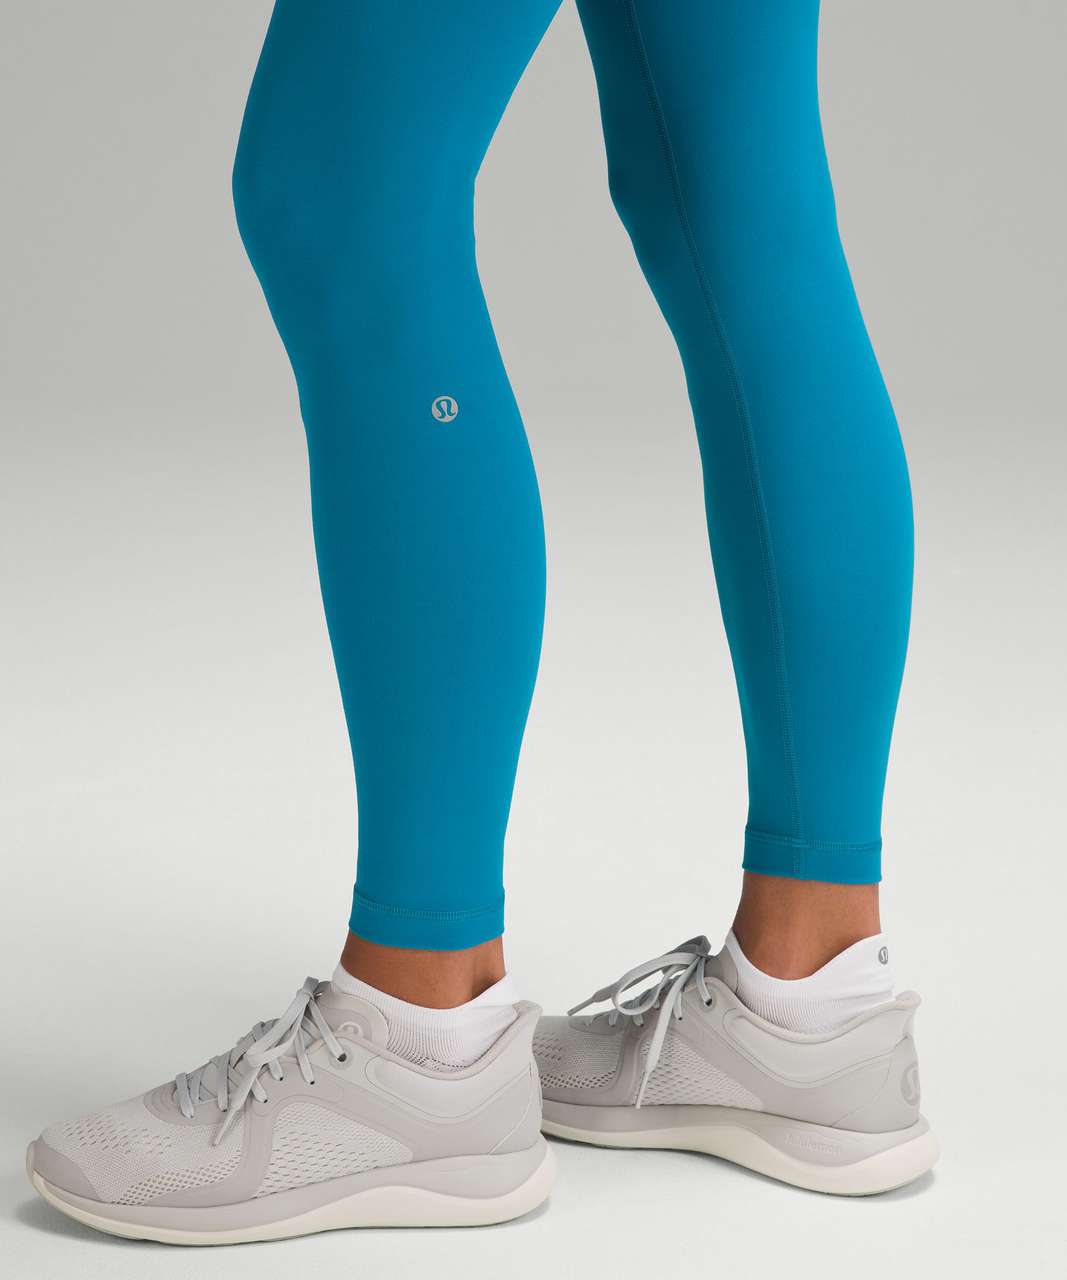 Lululemon Wunder Train High-Rise Tight 28' Blue Size 6 - $38 (61% Off  Retail) - From Mary